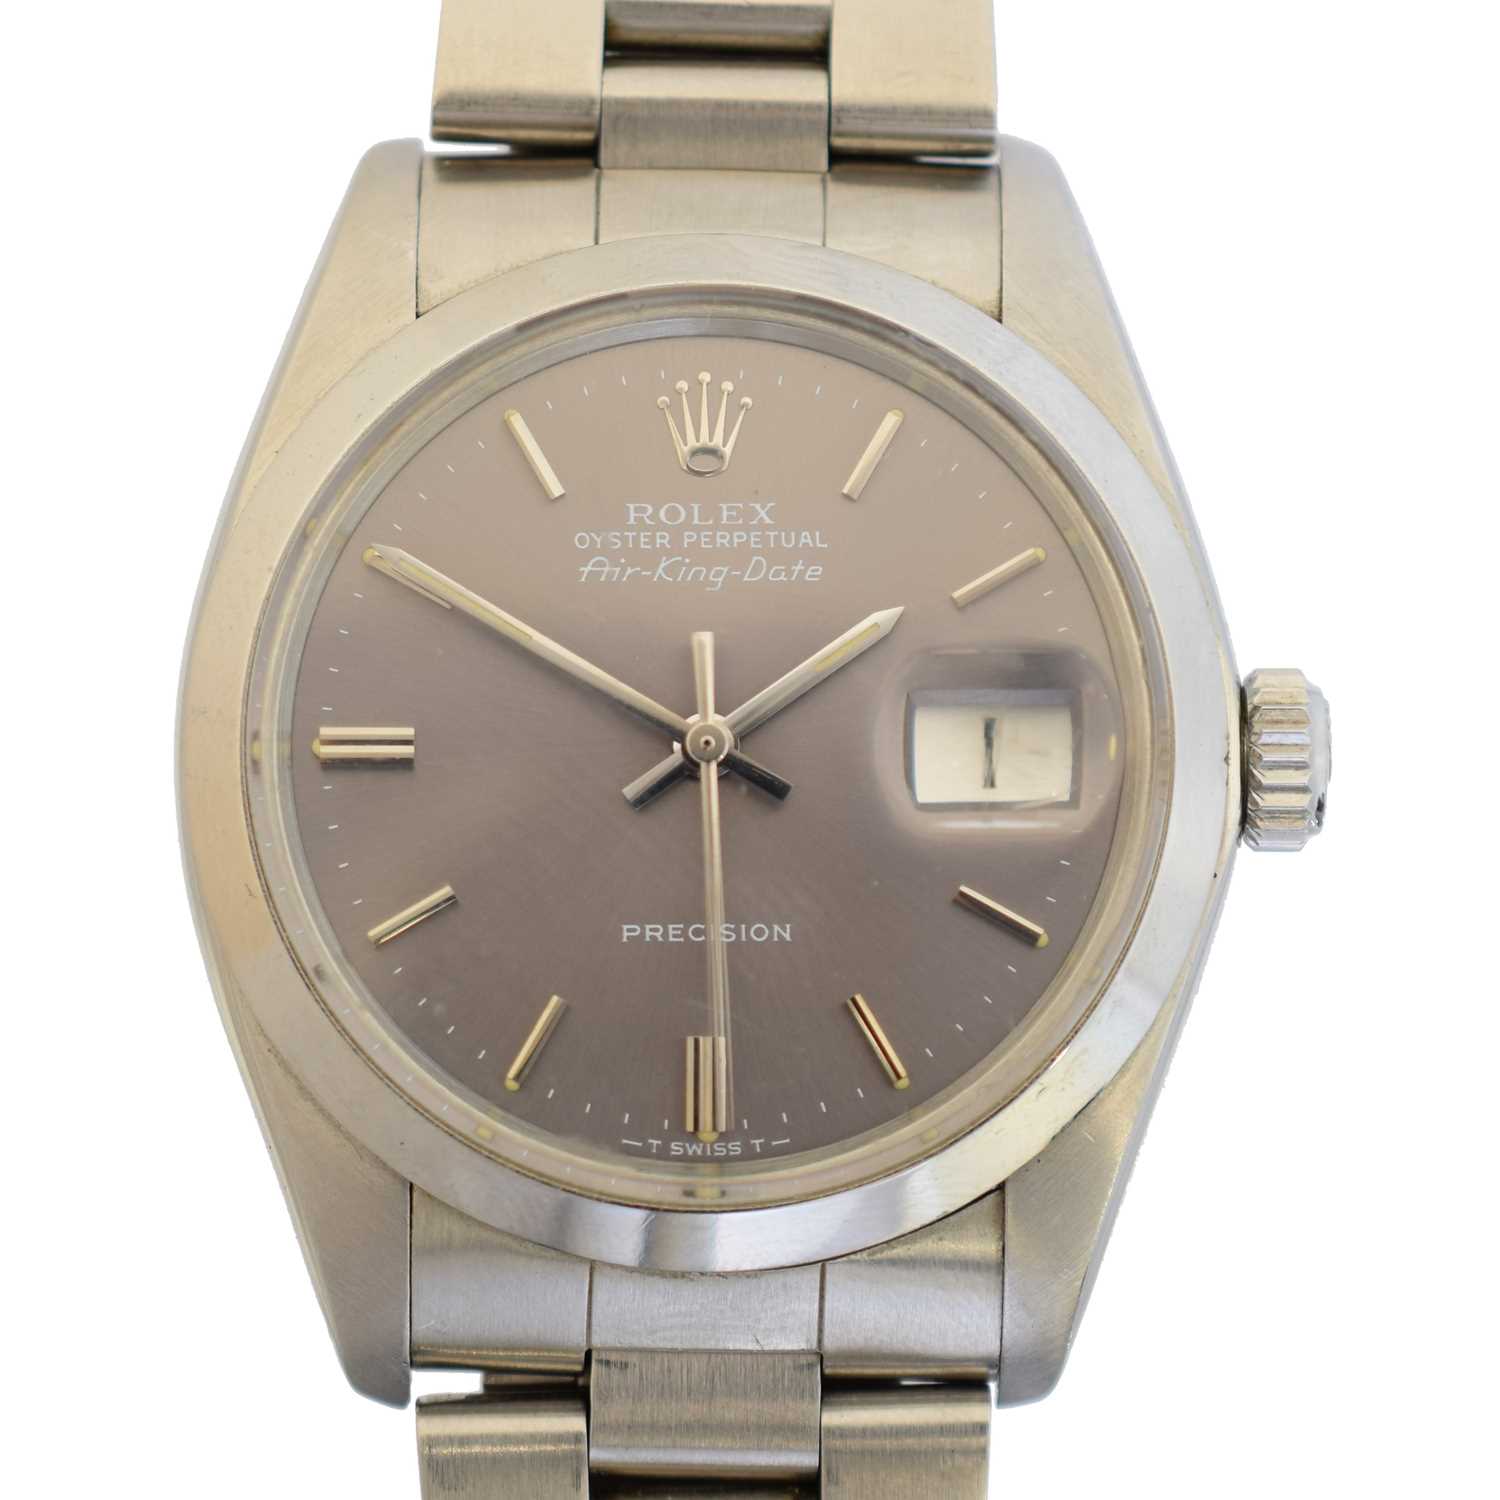 Lot 188 - A stainless steel Rolex Oyster Perpetual Airking watch